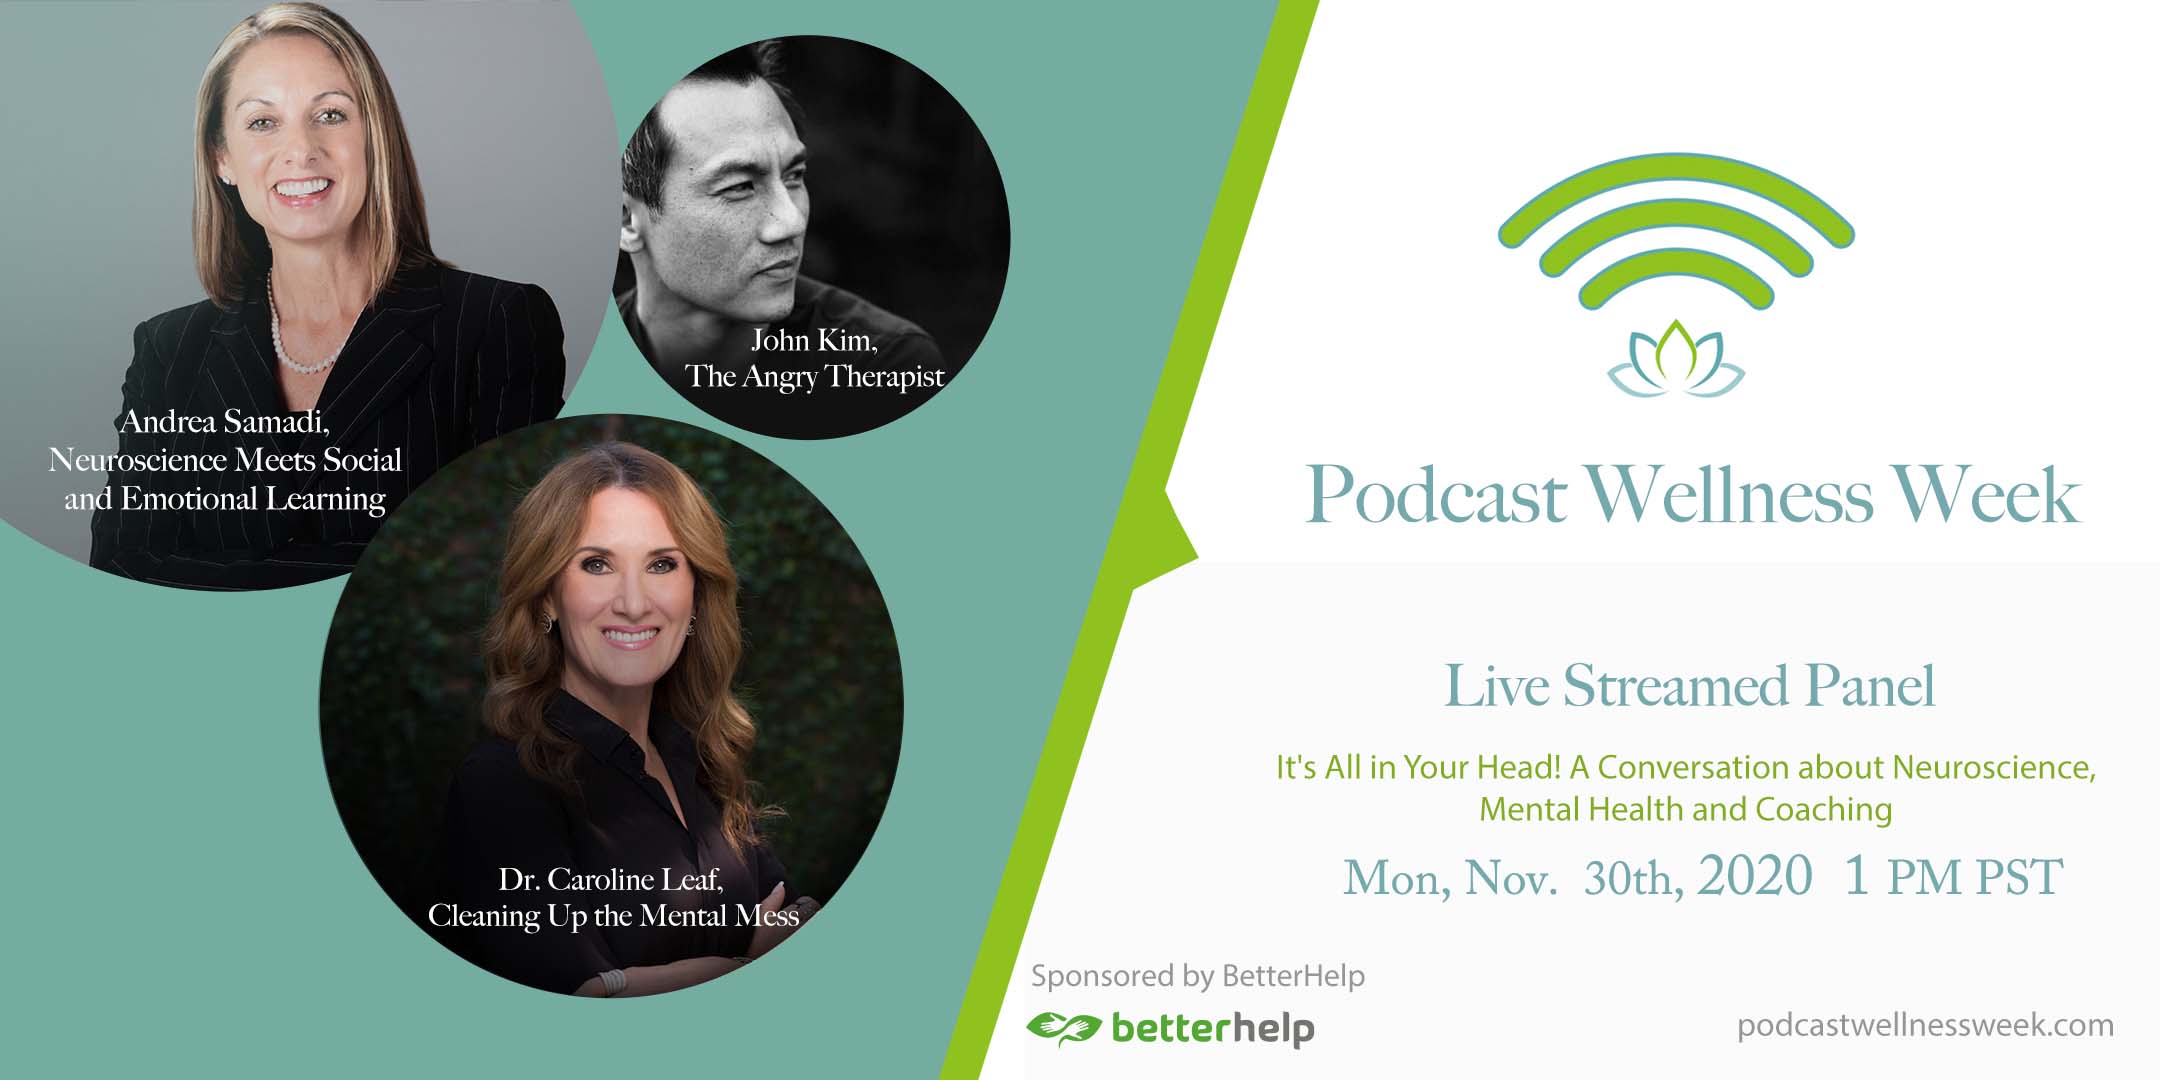 It's All in Your Head! A Conversation about Neuroscience, Mental Health and Coaching